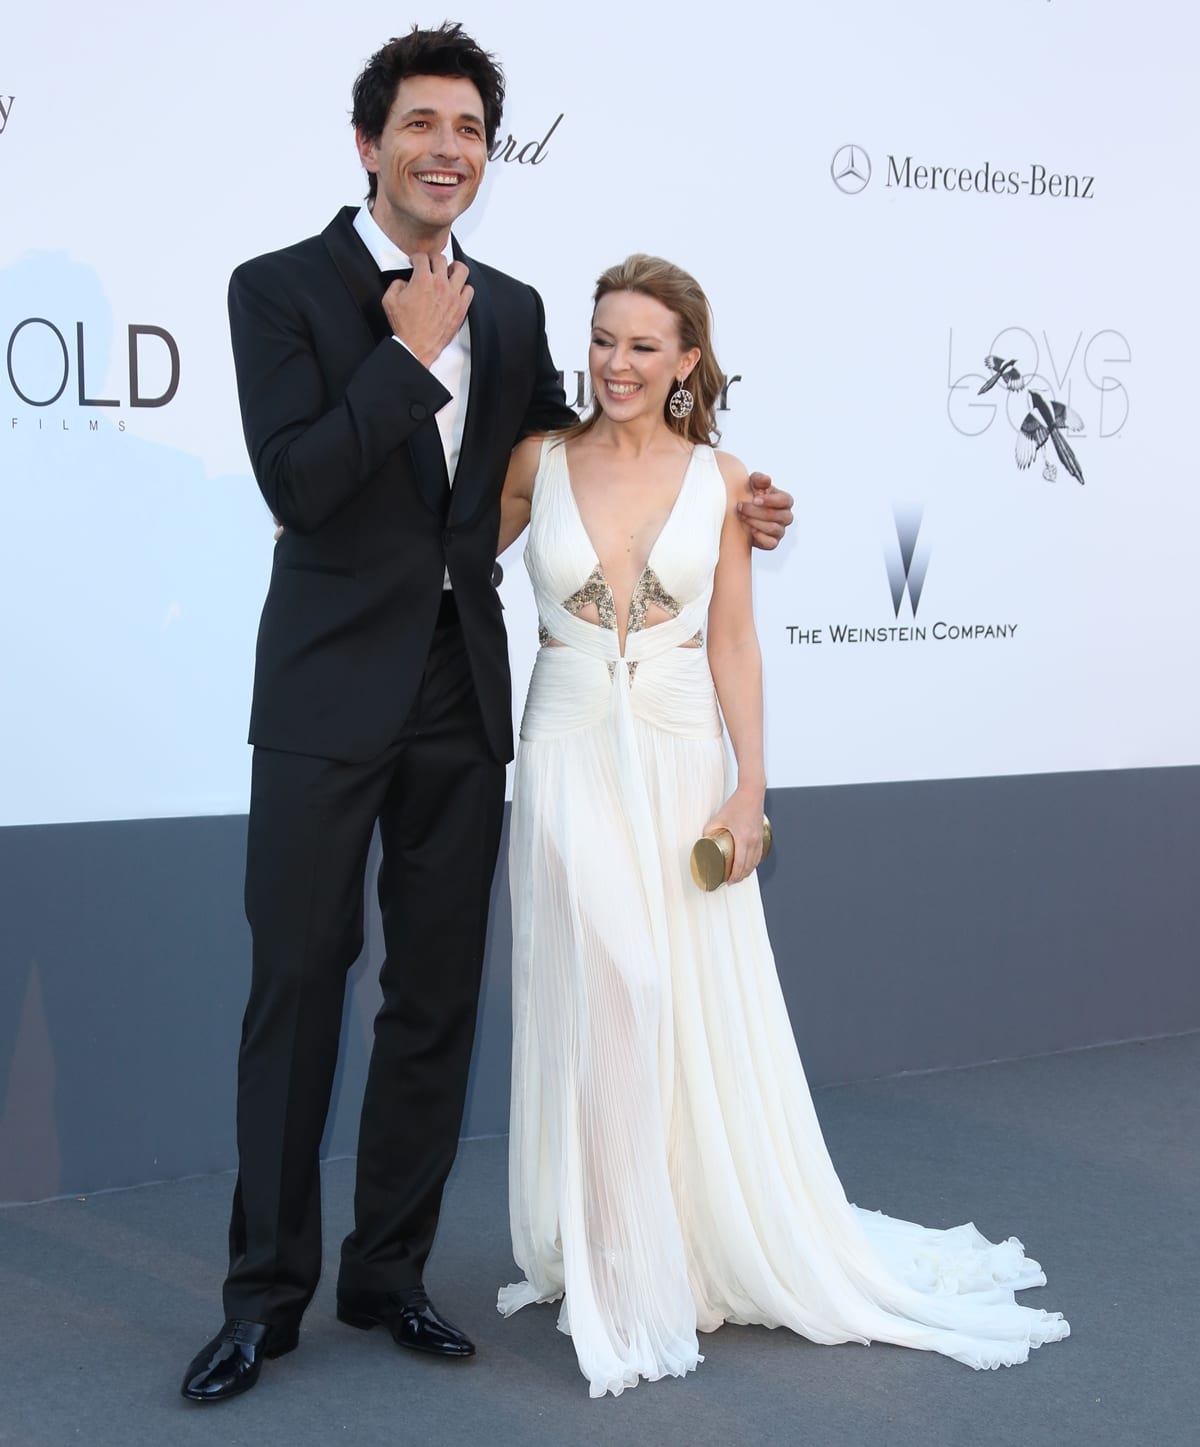 The height difference between Kylie Minogue and Andres Velencoso is approximately 40.6 cm, or about 0.406 meters